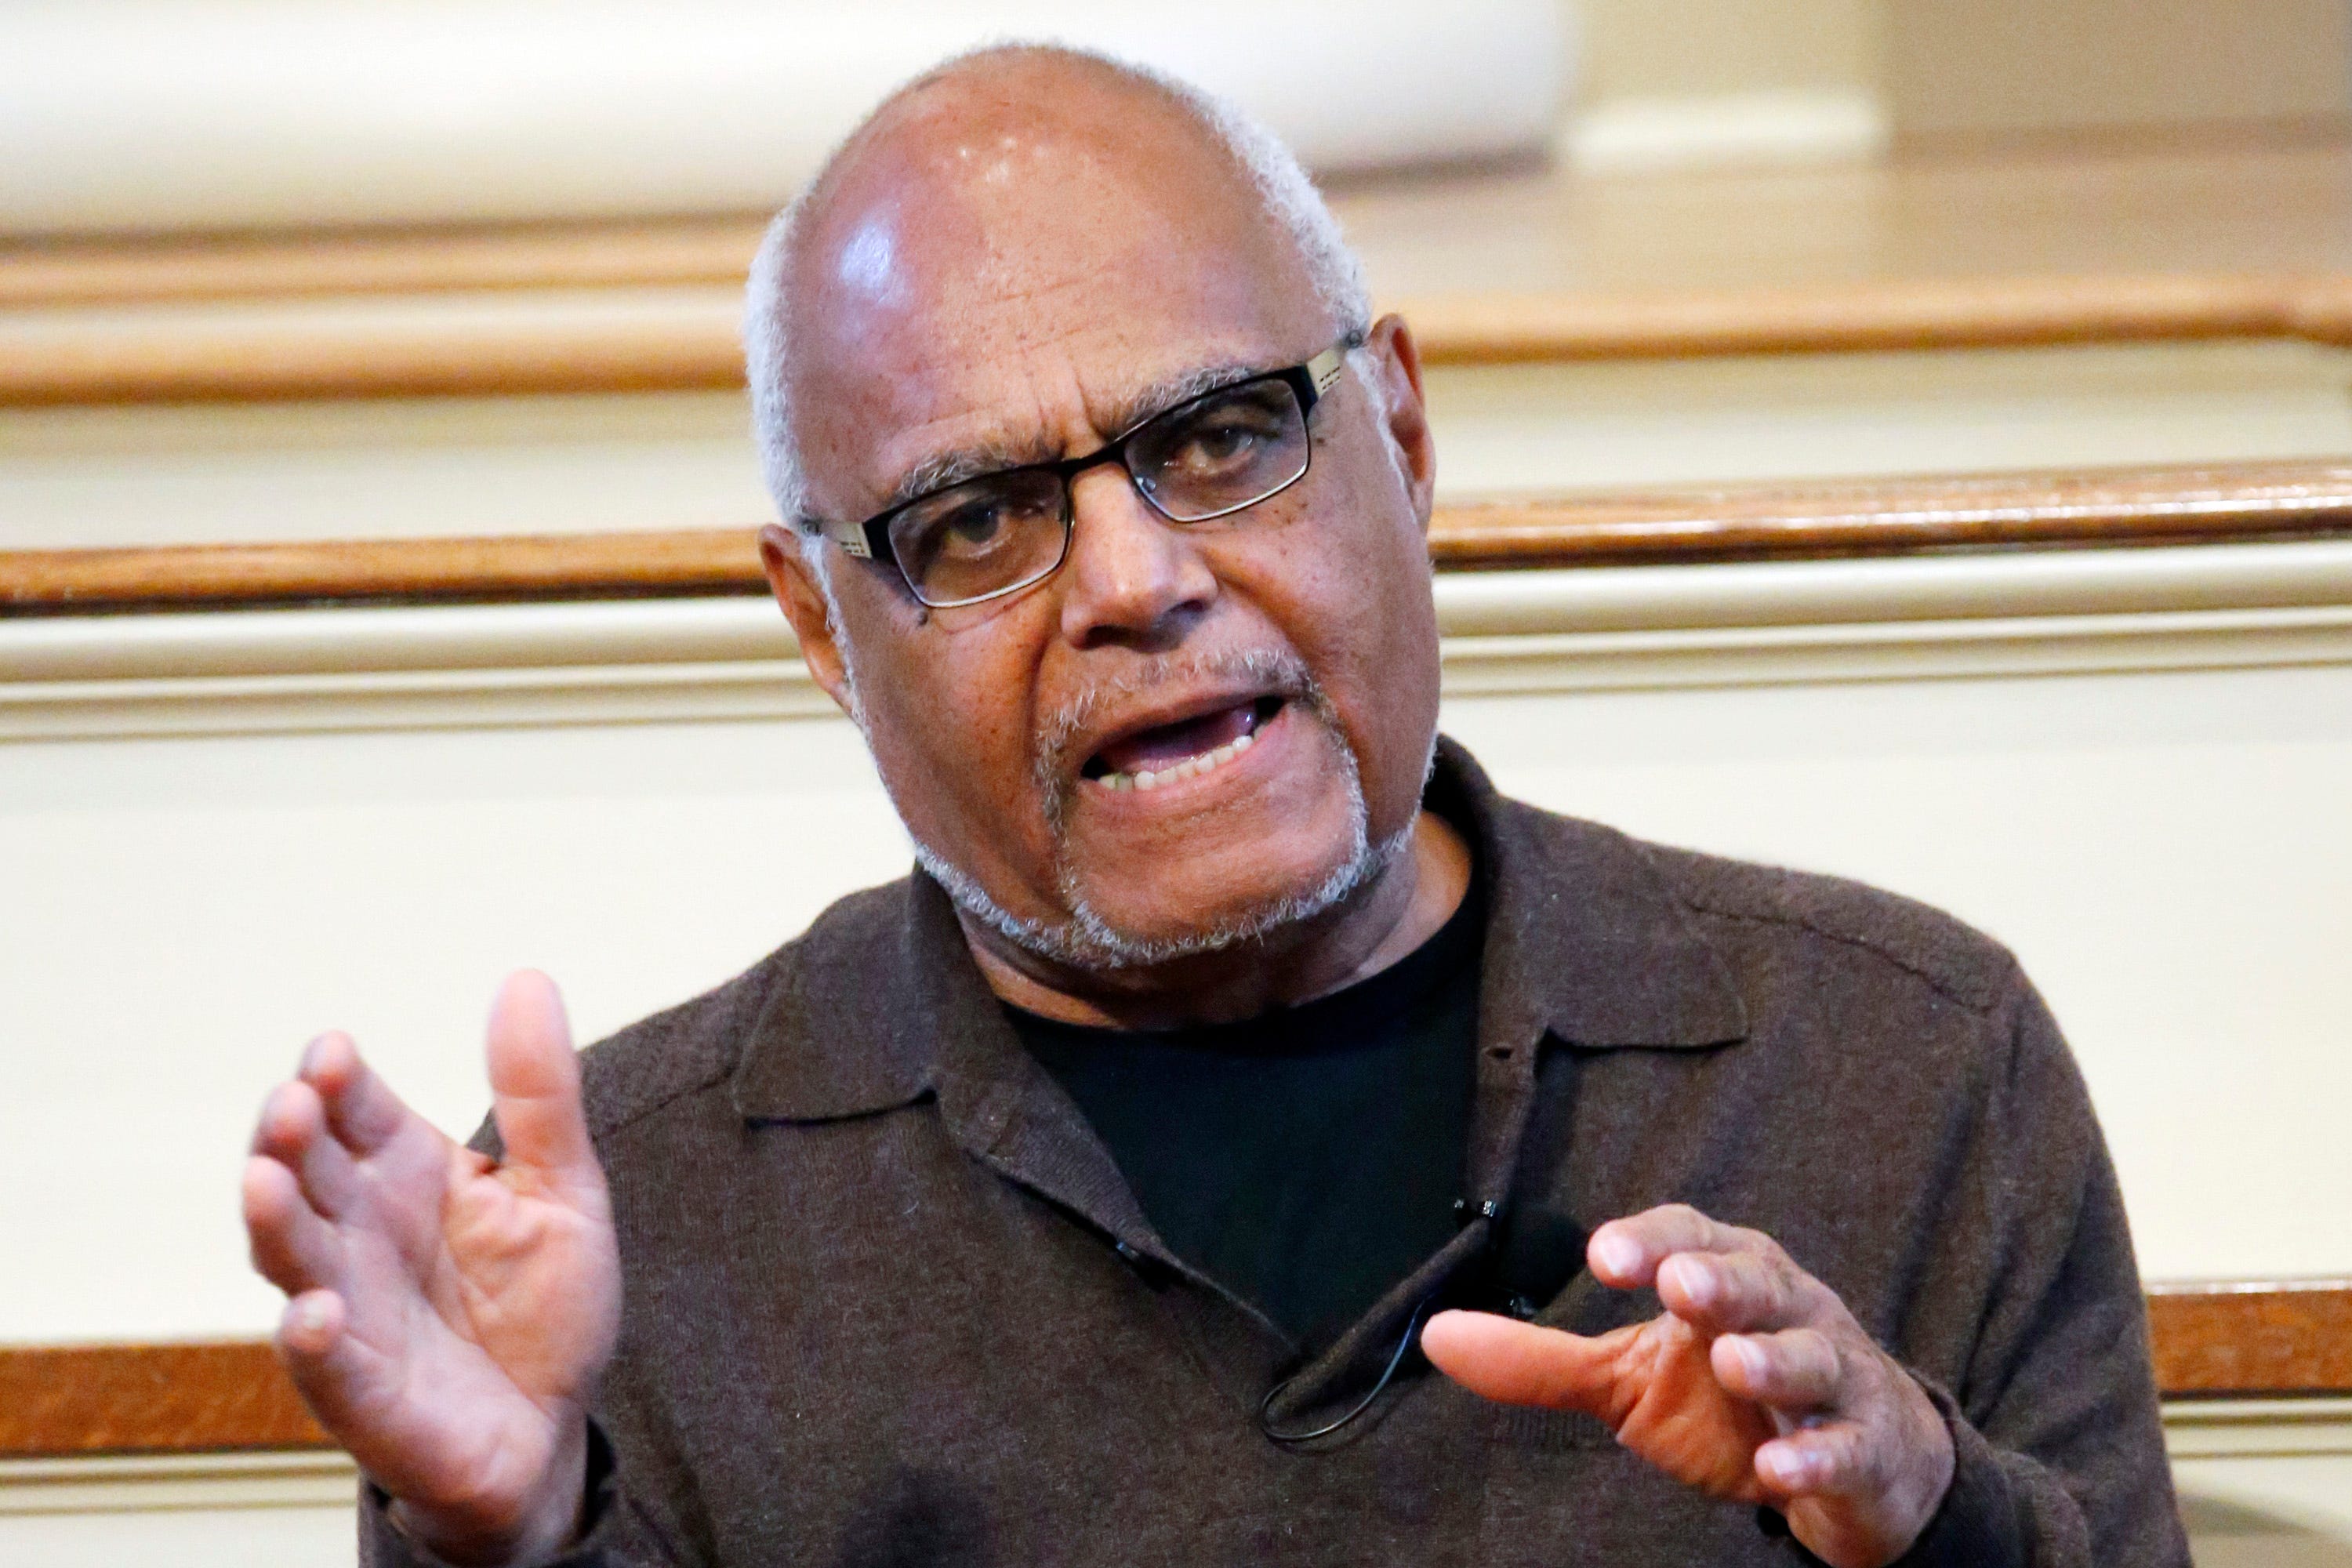 Robert "Bob" Moses, director of the Mississippi Summer Project and organizer for the Student Nonviolent Coordinating Committee (SNCC), answers questions about Freedom Summer in 1964 during a national youth summit Feb. 5, 2014, hosted by the Smithsonian's National Museum of American History at the Old Capitol Museum in Jackson, Miss.